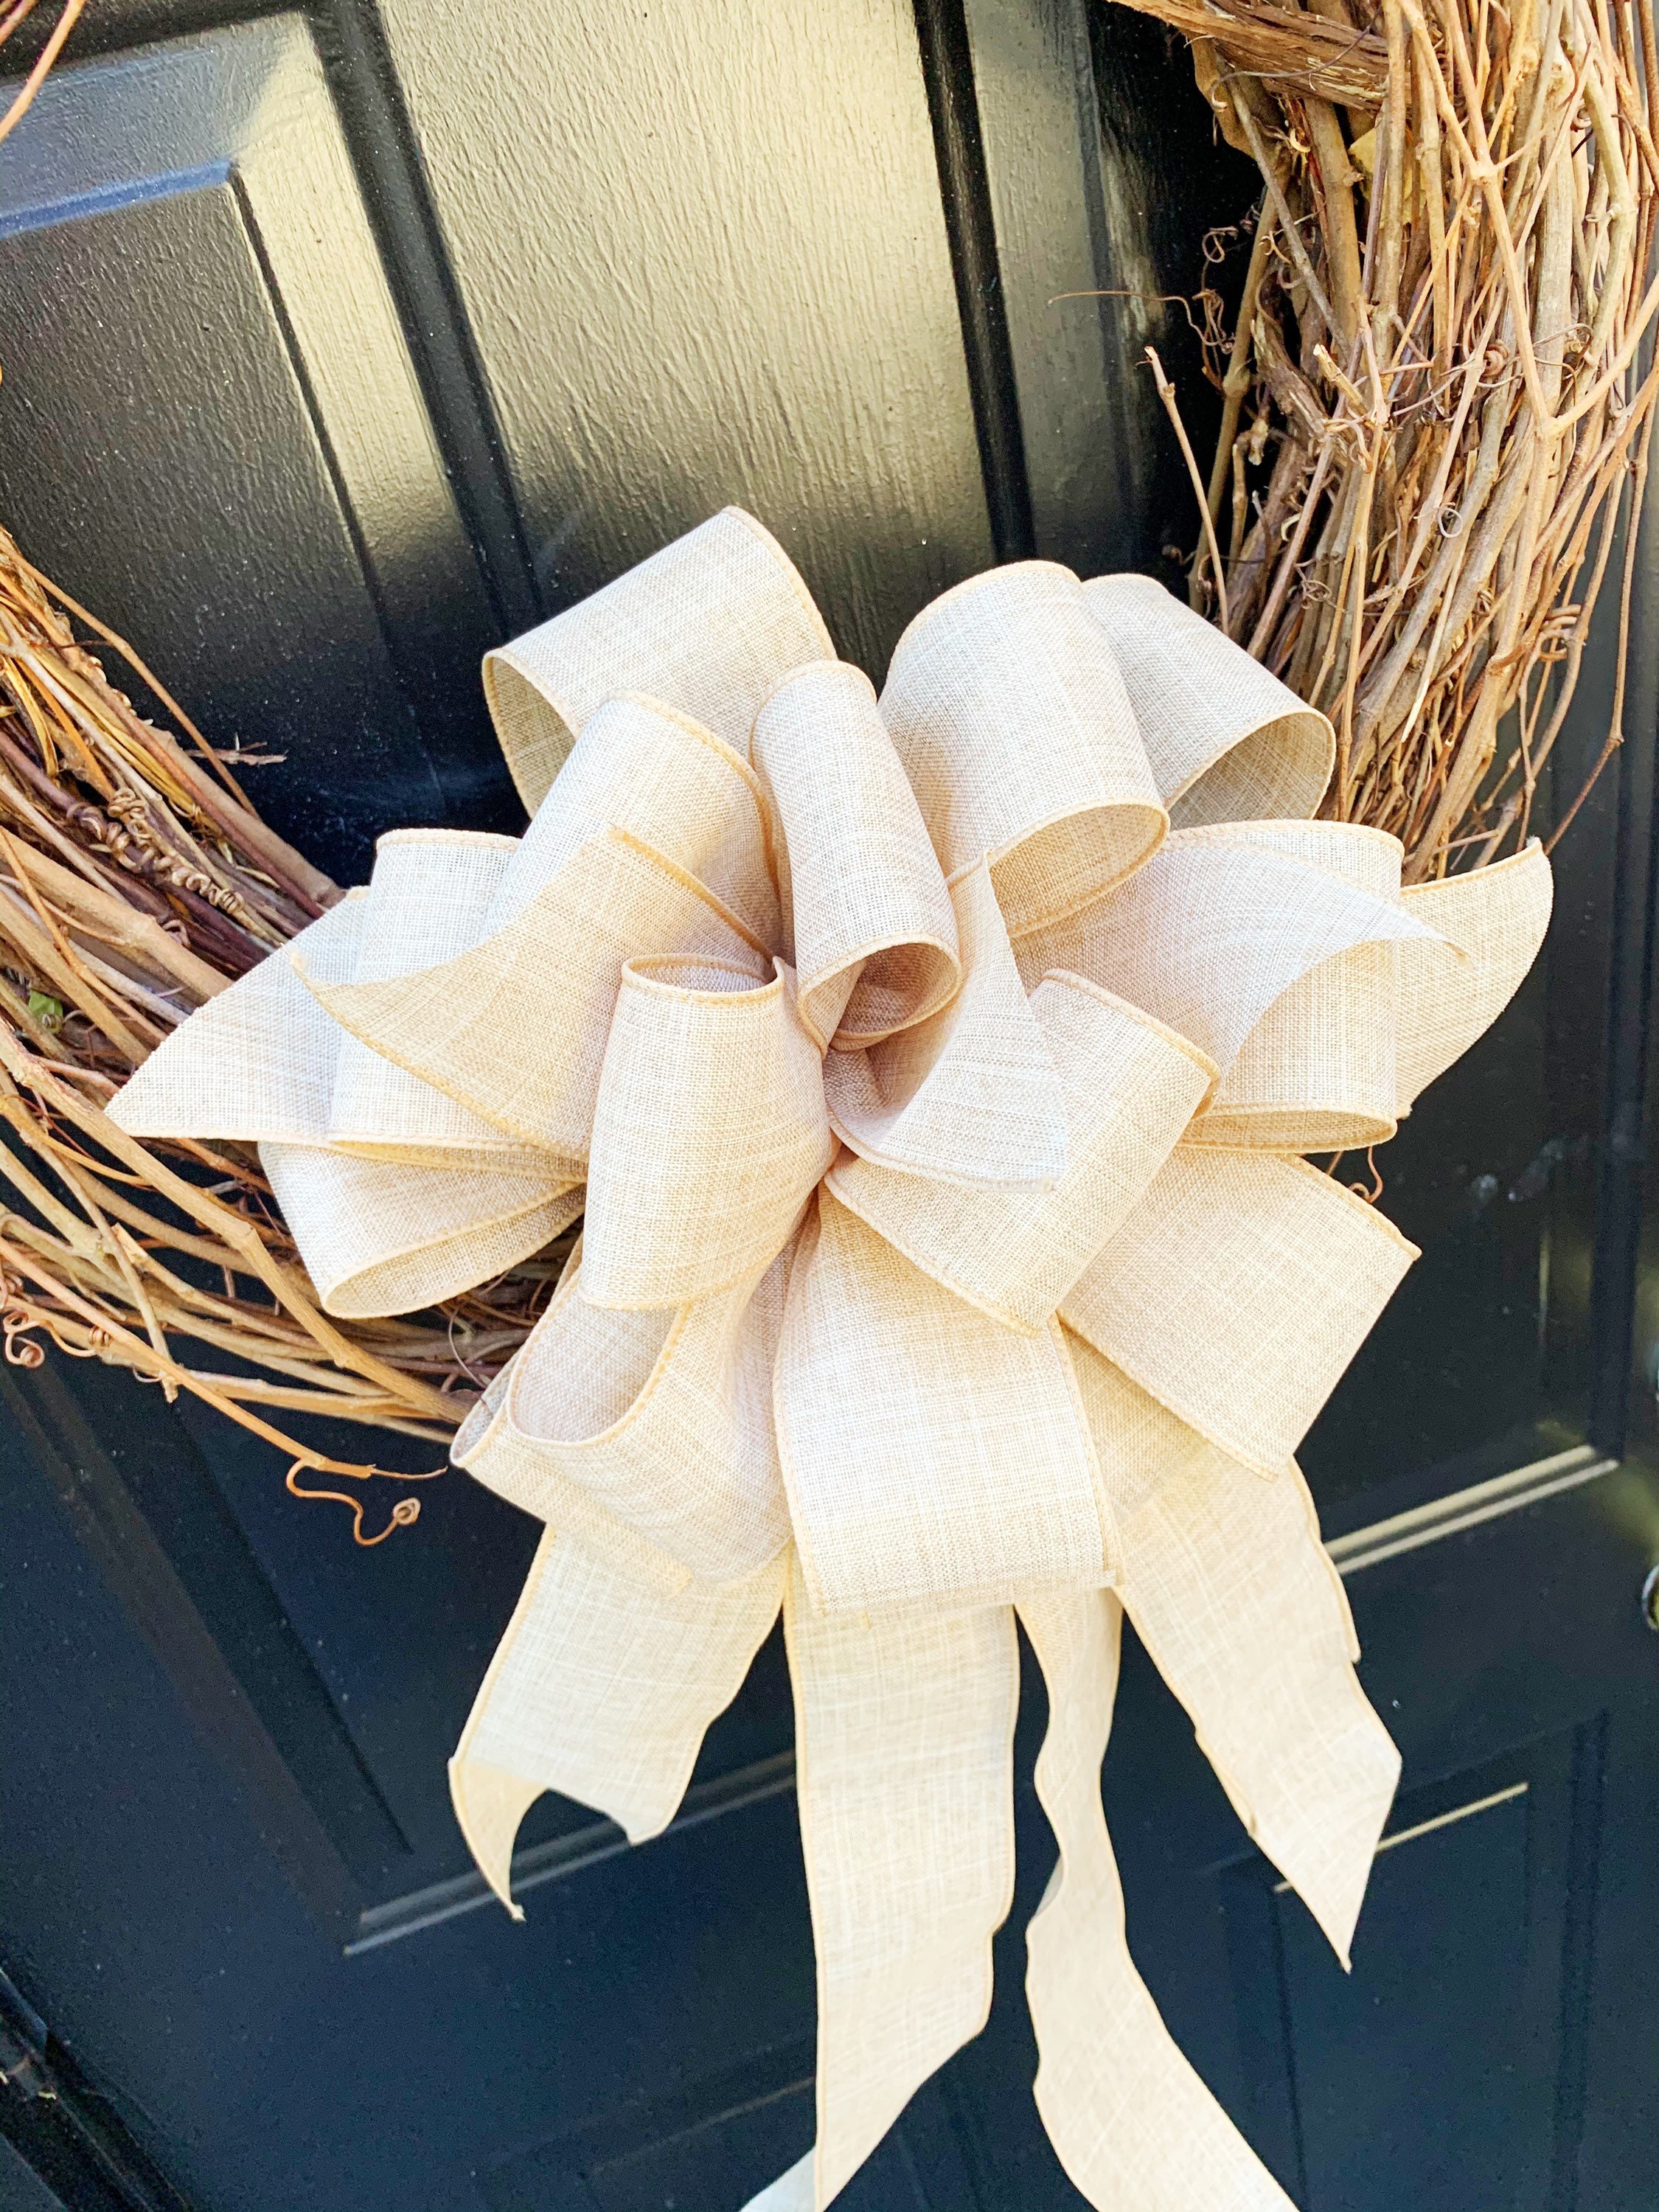 Burlap Bow Holiday Wreath Bow DIY Crafts Rustic Jute Bowknot Ornaments for Christmas Tree Topper Wedding Party Decorations, 11.8 inchx9.8 inch, Size